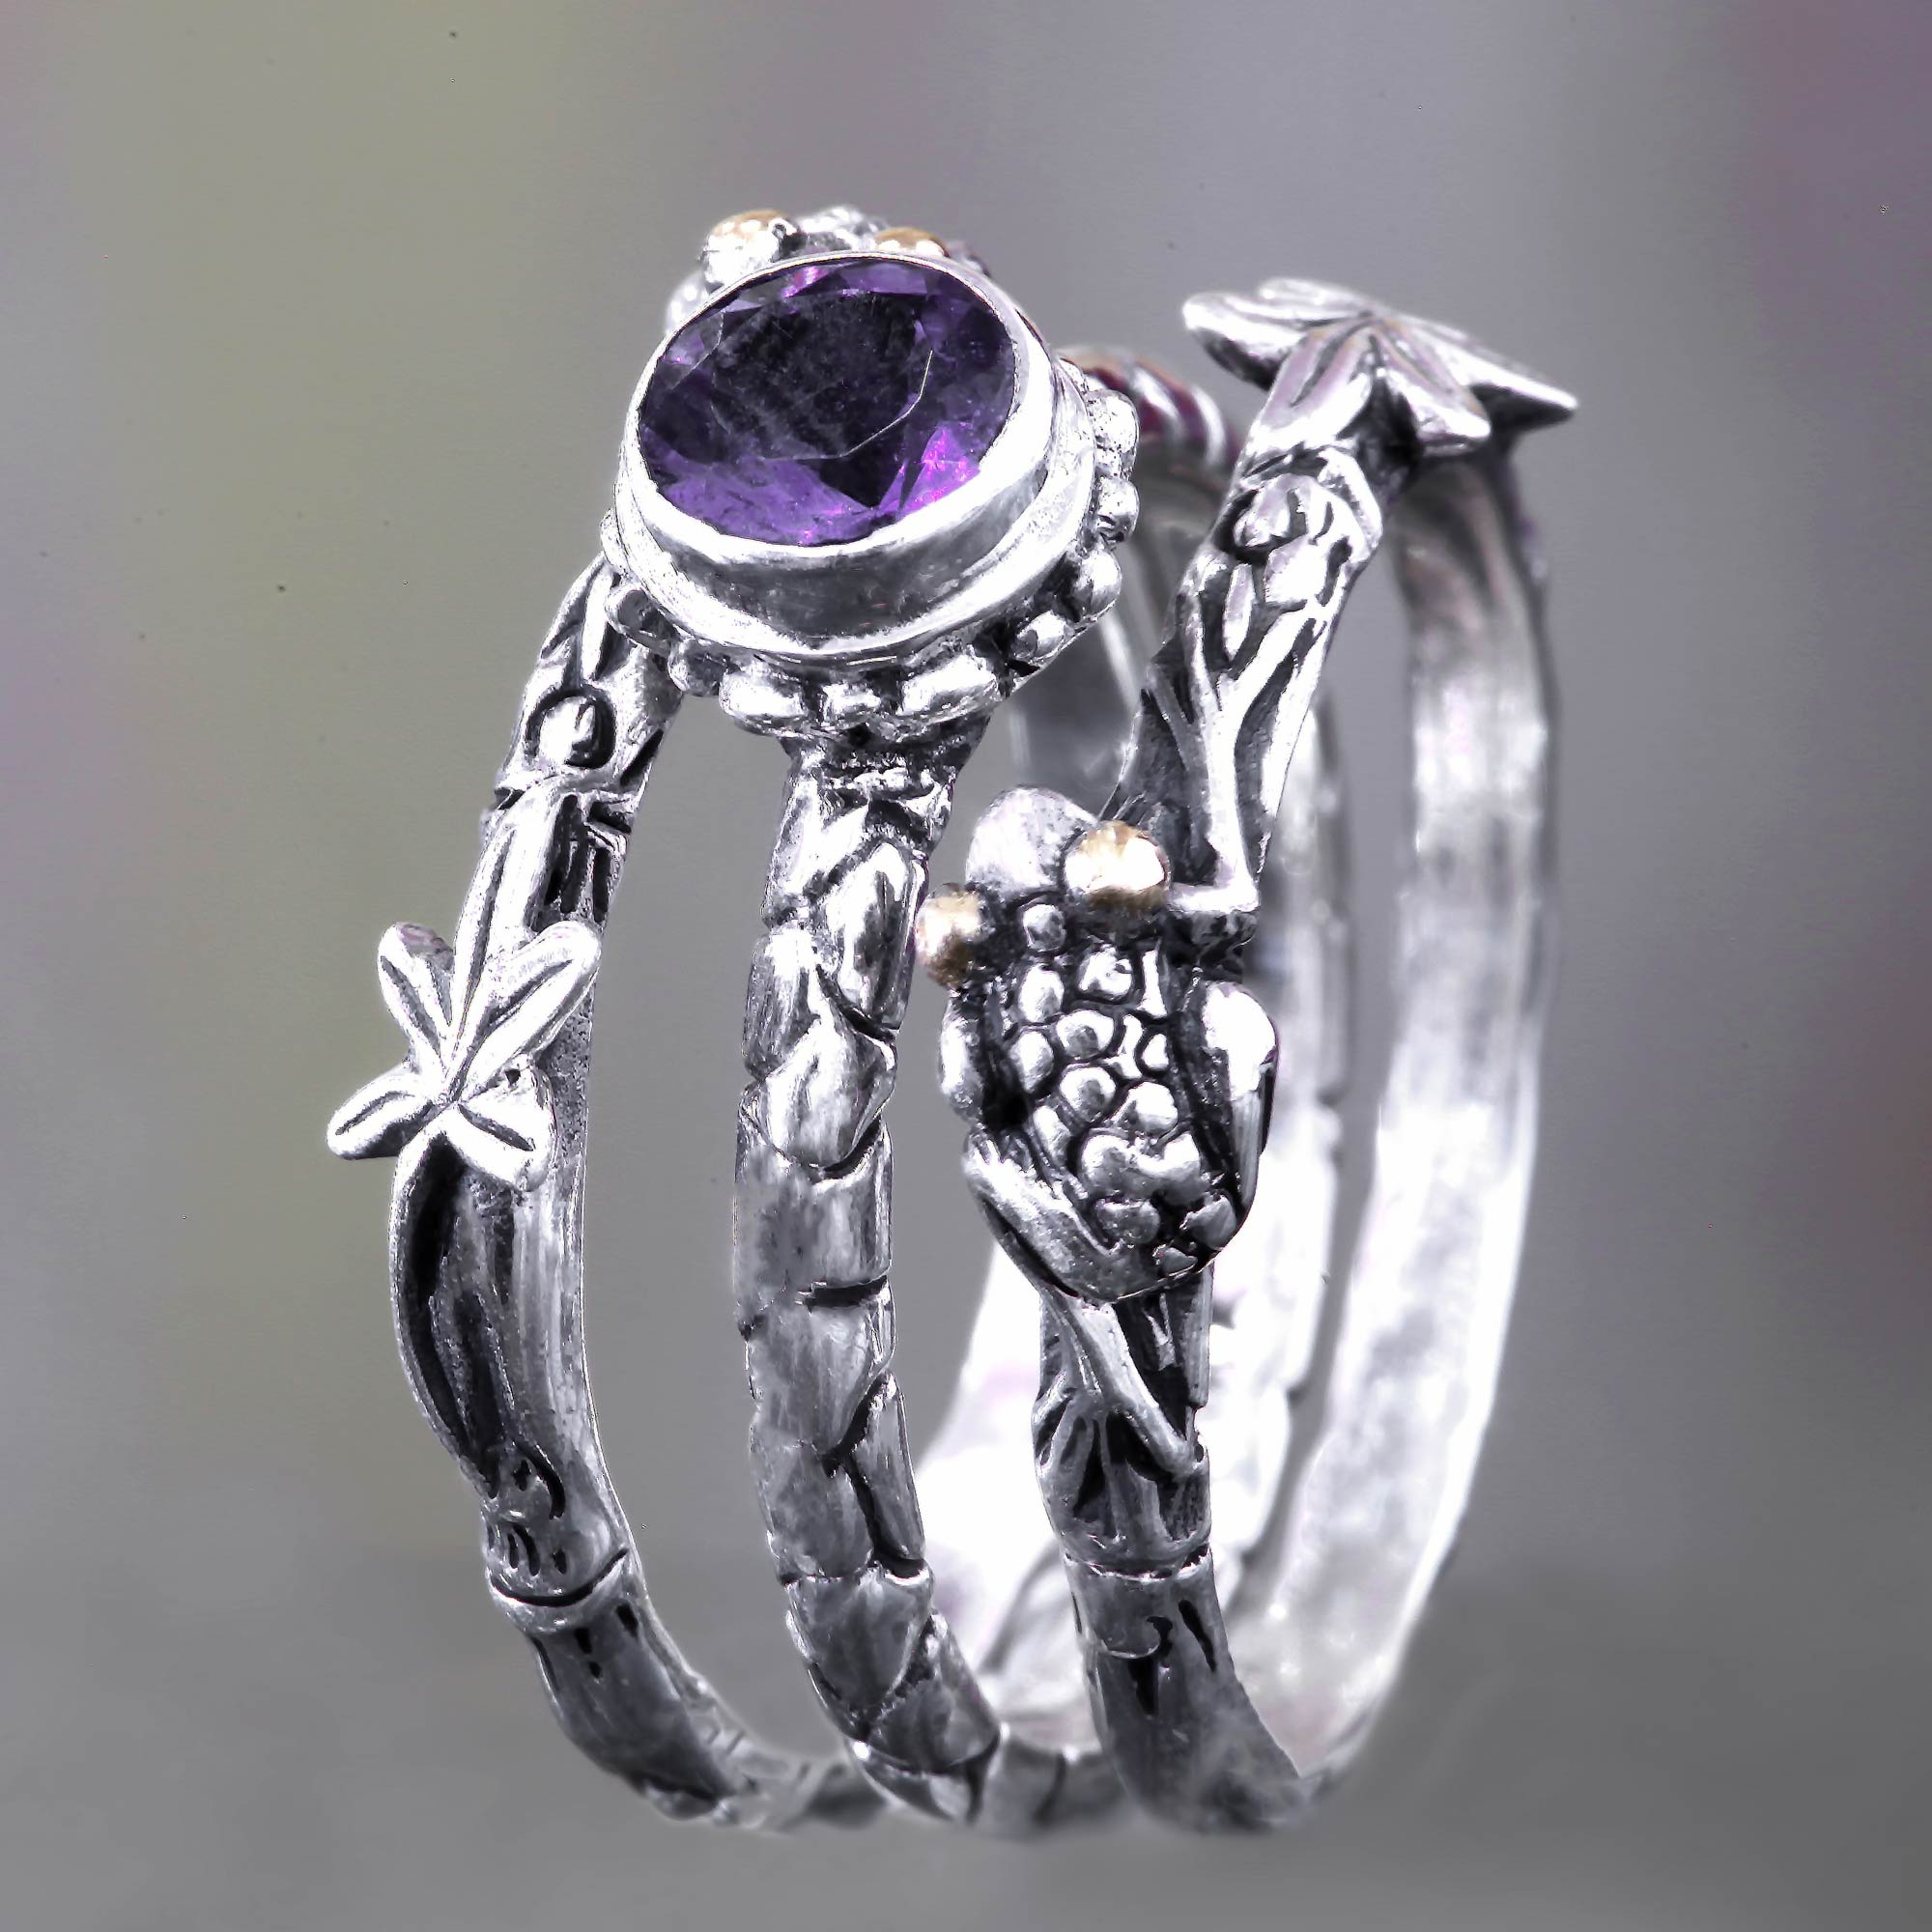 Amethyst and Sterling Silver Stacking Rings (set of 3), 'Tree Frog'